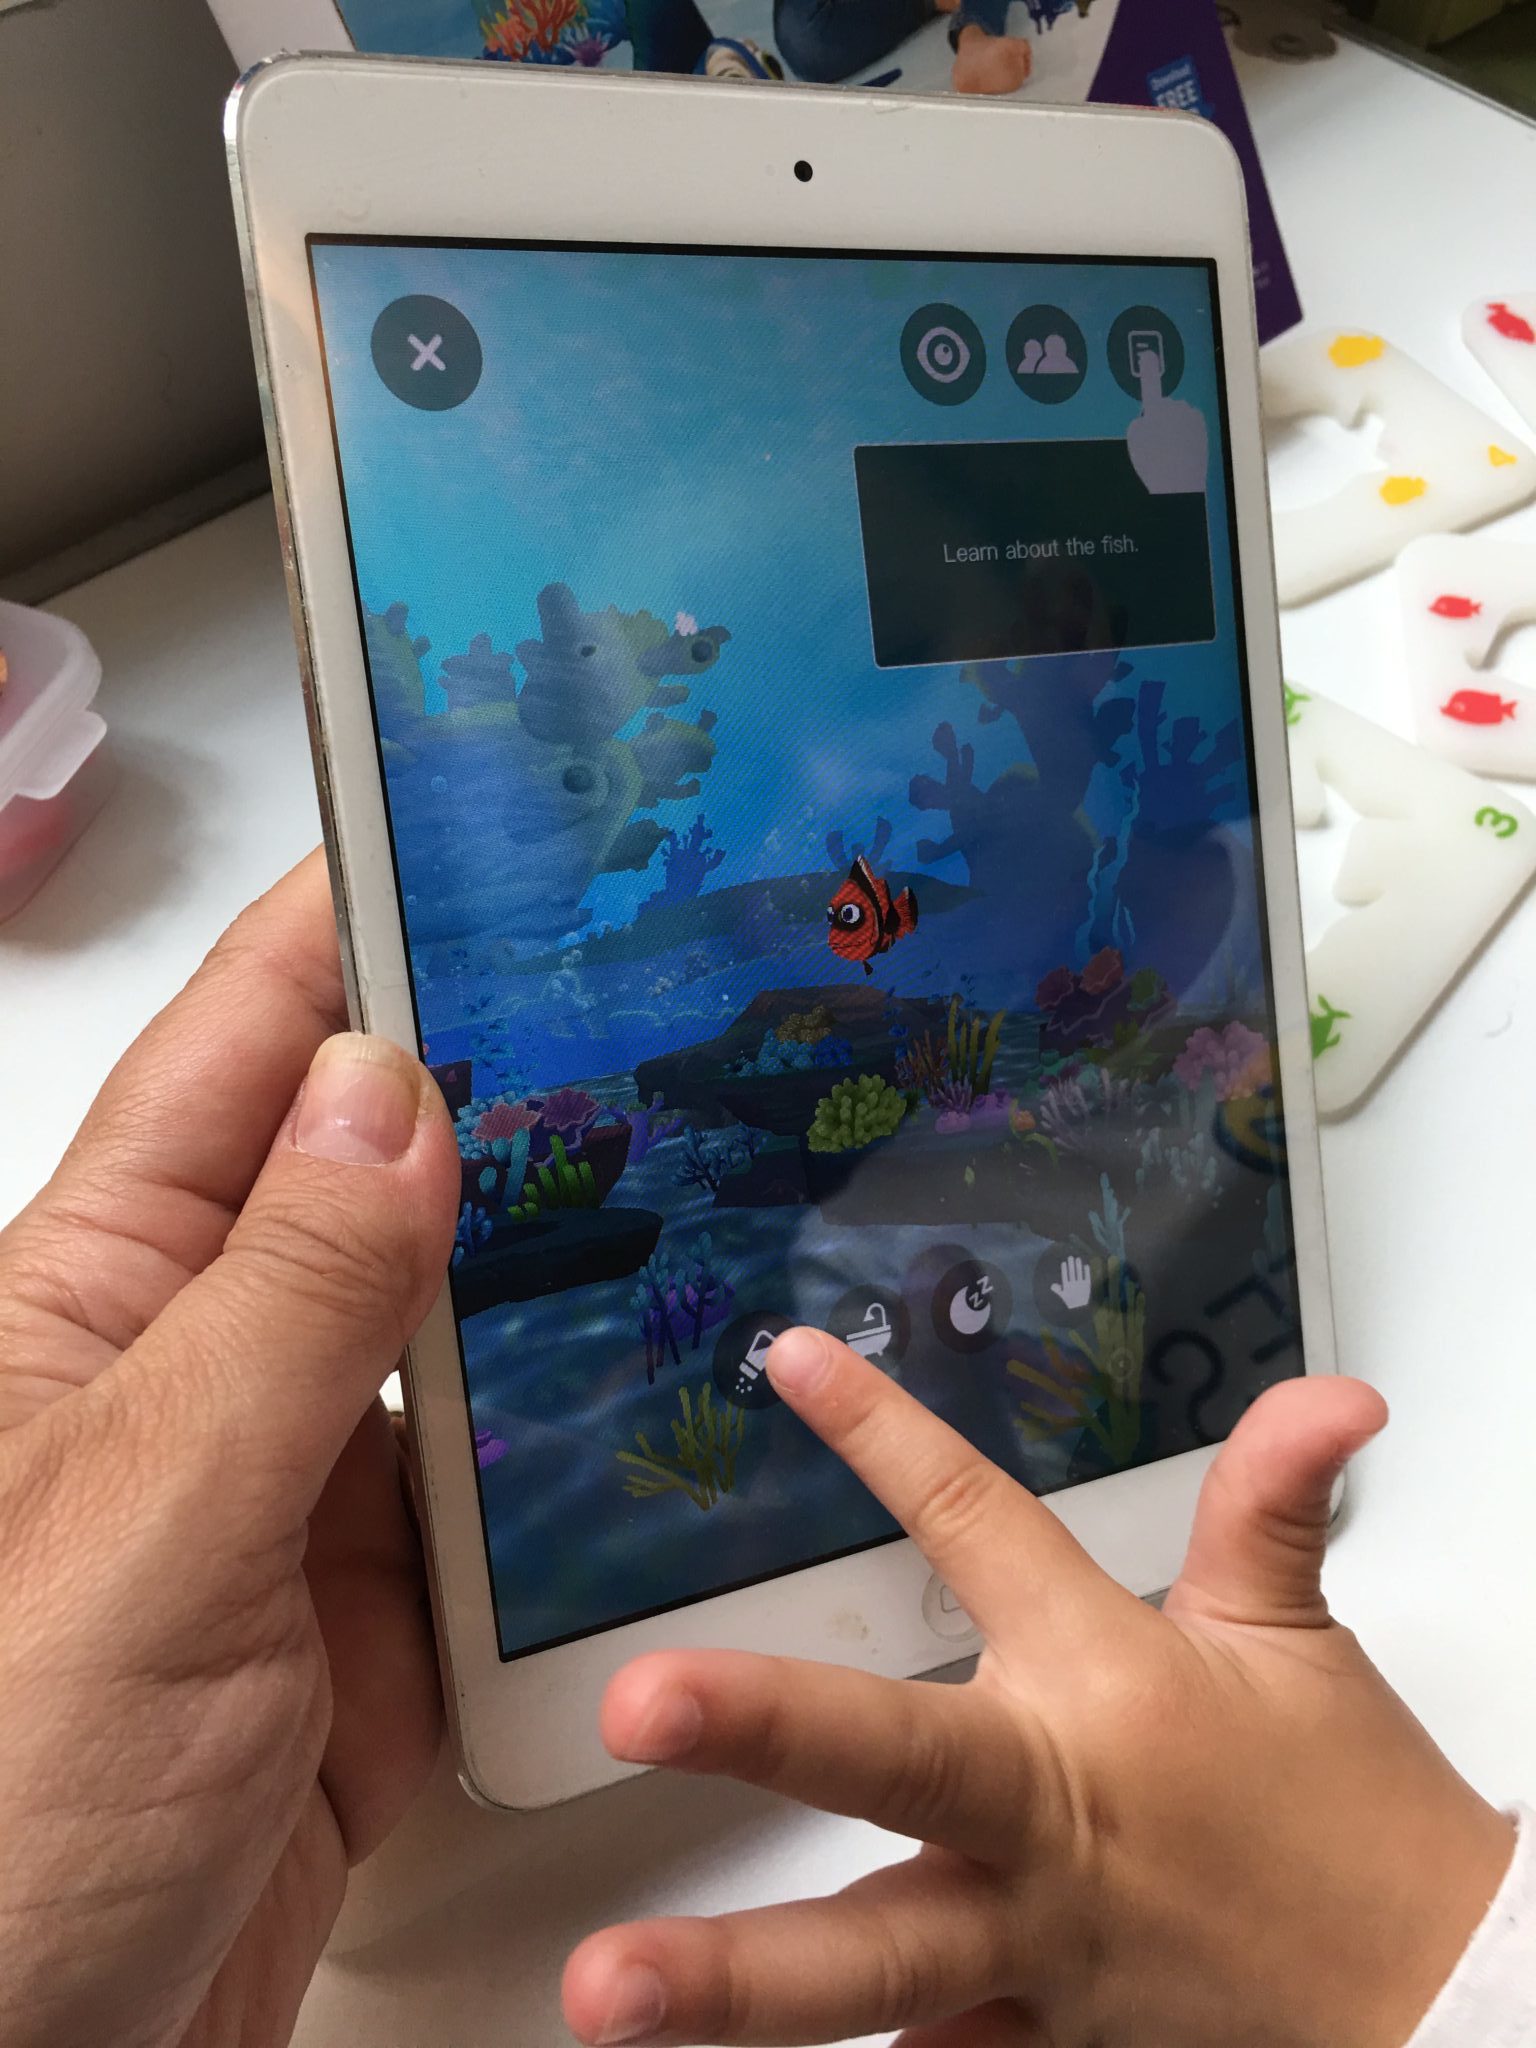 Has your kid ever asked for a pet fish? Or maybe an entire aquarium full of them? With Ocean Pets kids can create a virtual aquarium and have fun learning!